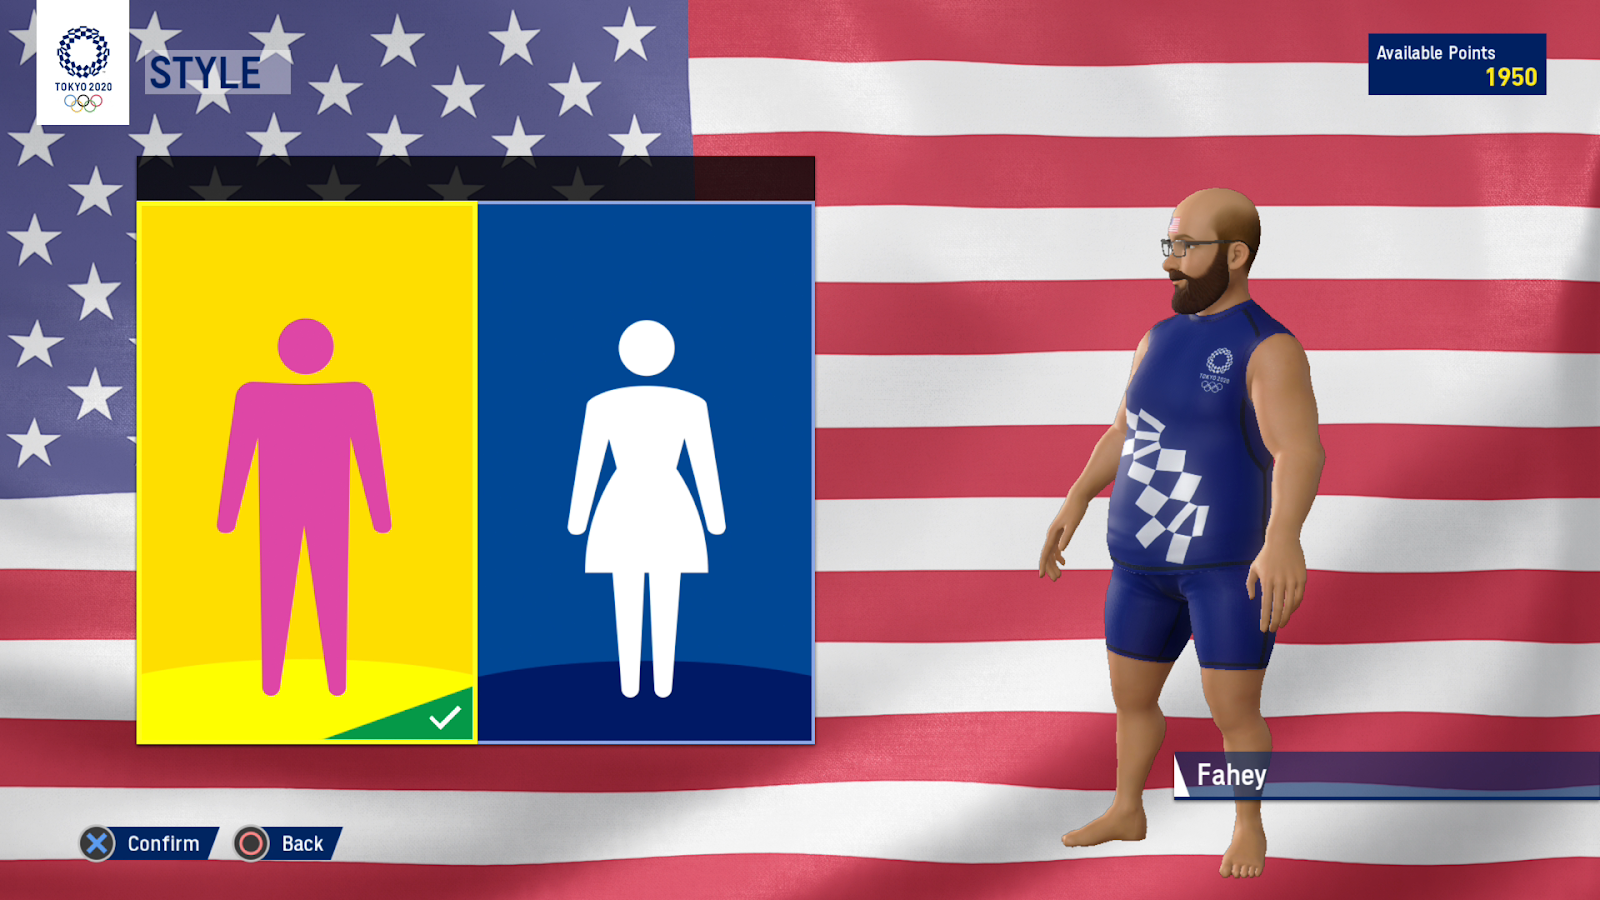 The New Olympics Game Lets Me Be Tubby, And I Appreciate That